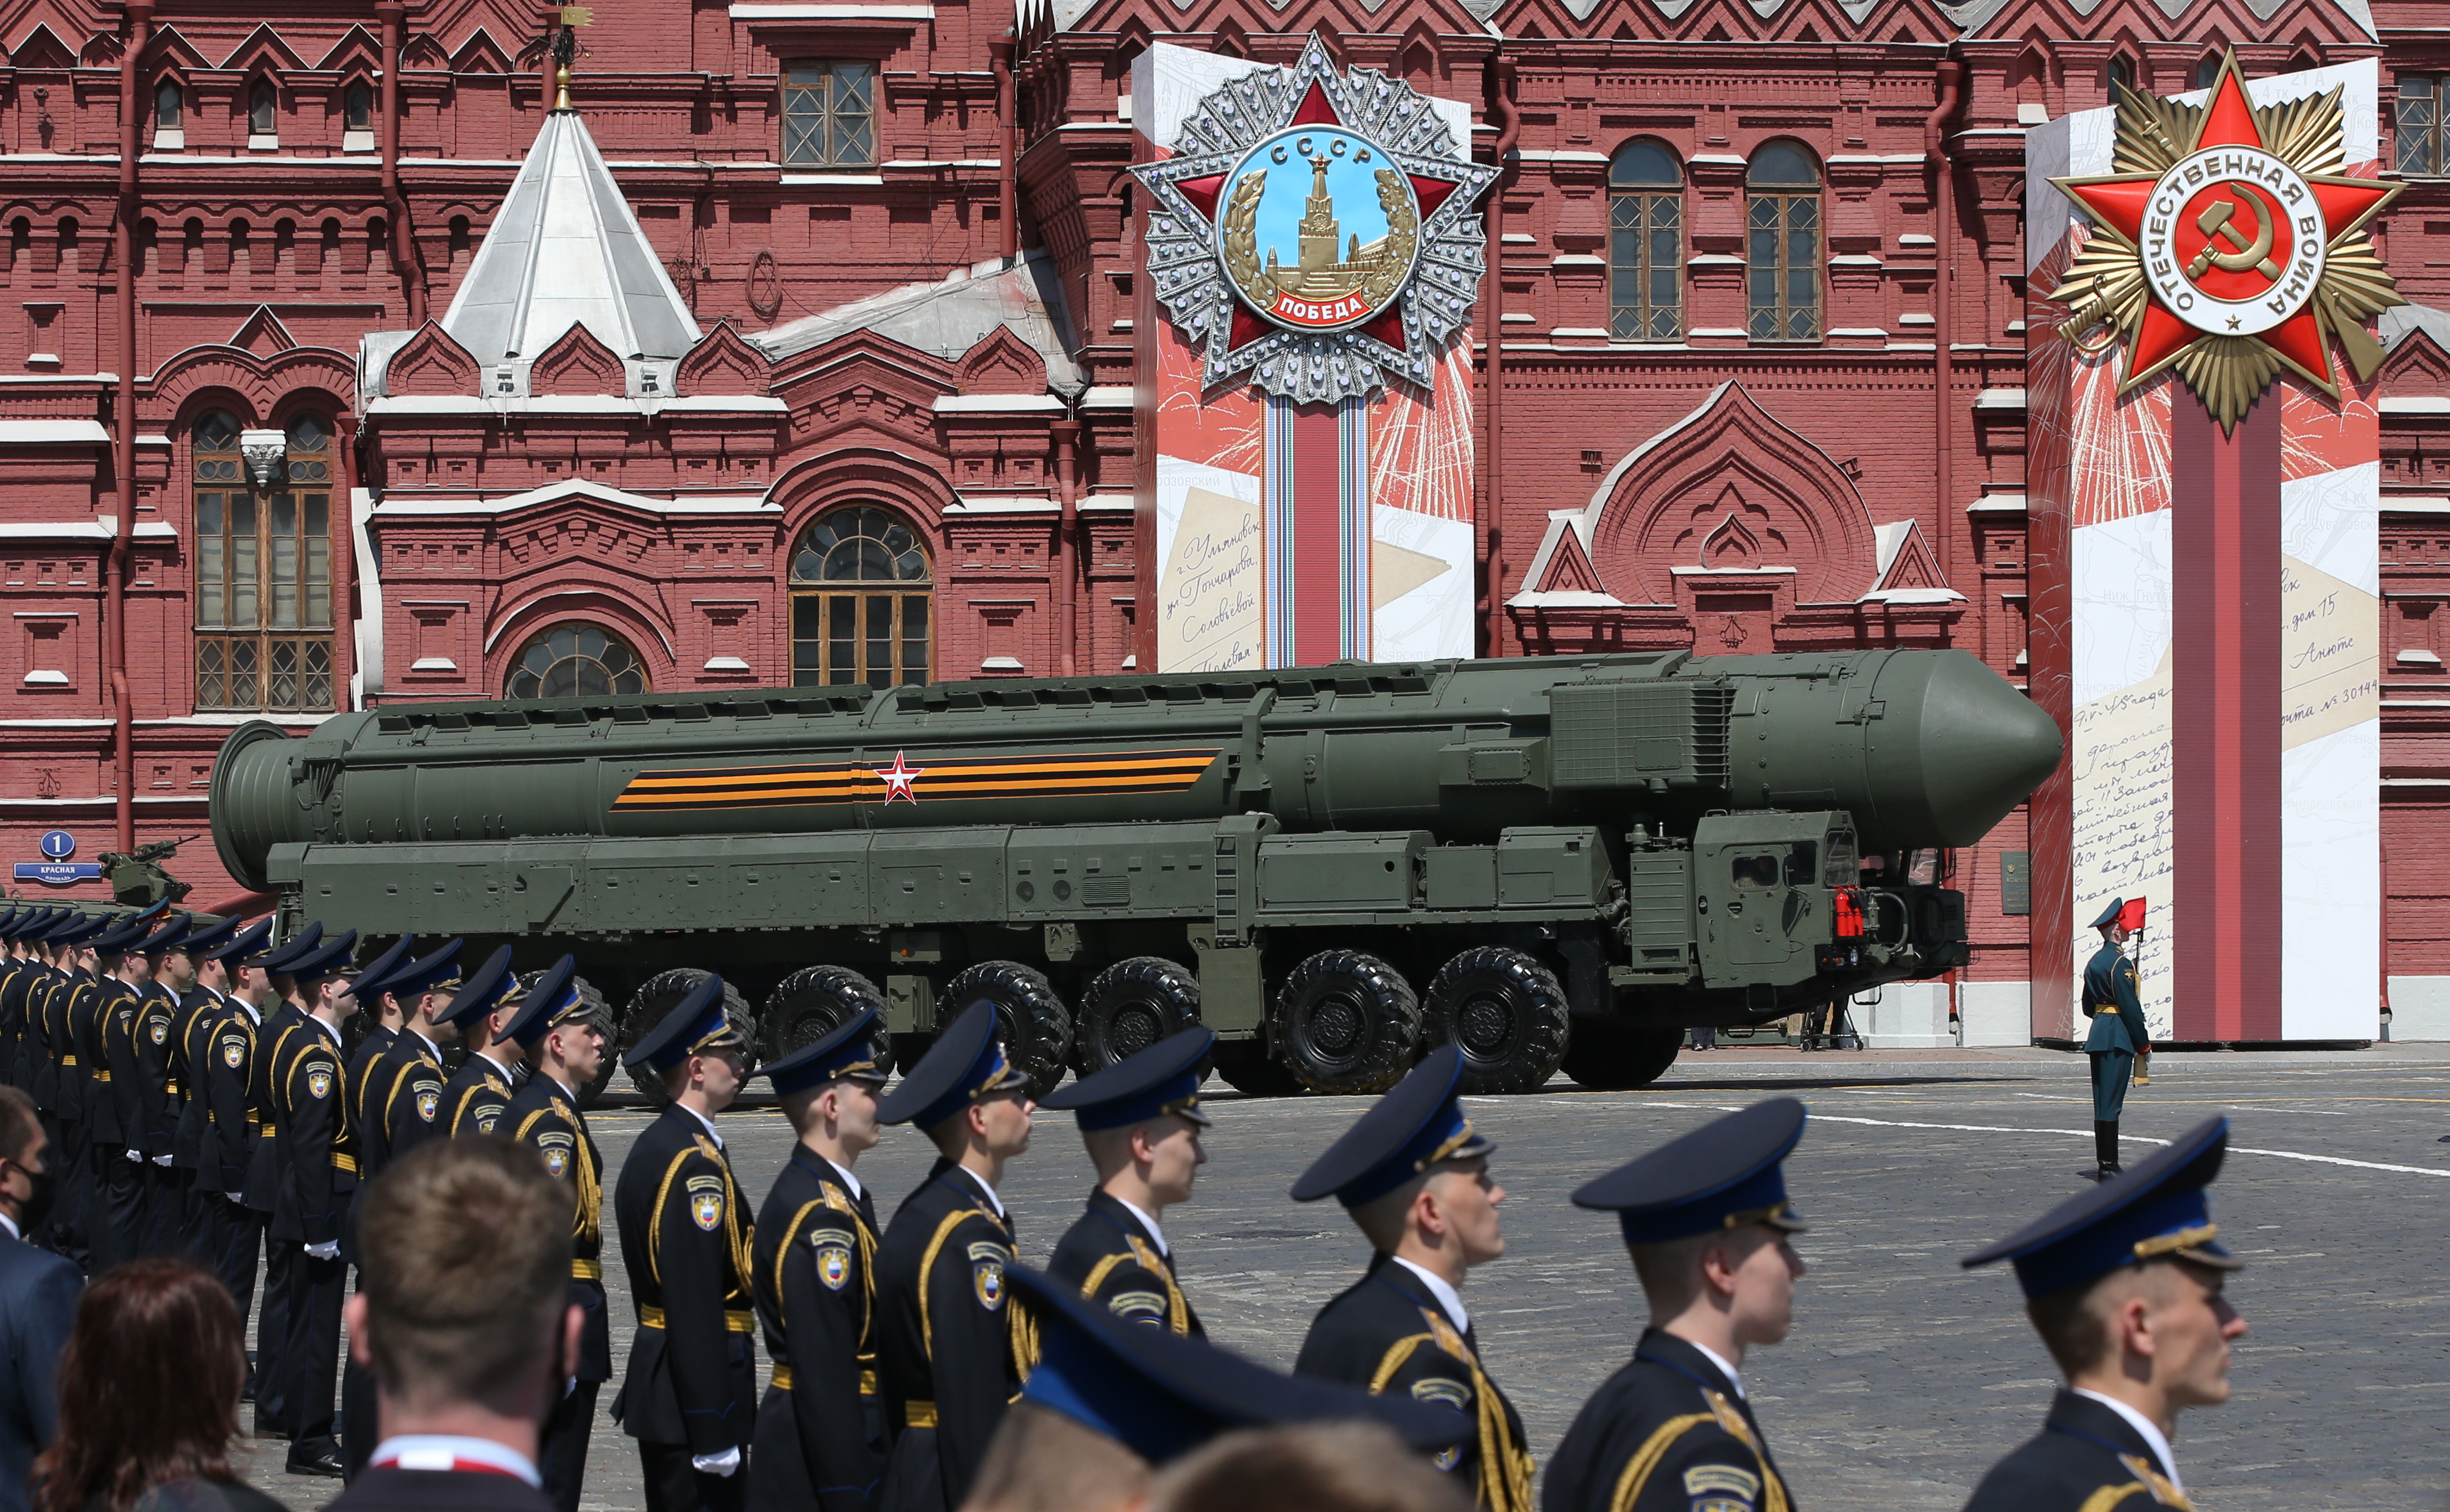 Russian nuclear missile rolls along Red Square during the military parade marking the 75th anniversary of Nazi defeat, on June 24, 2020 in Moscow, Russia